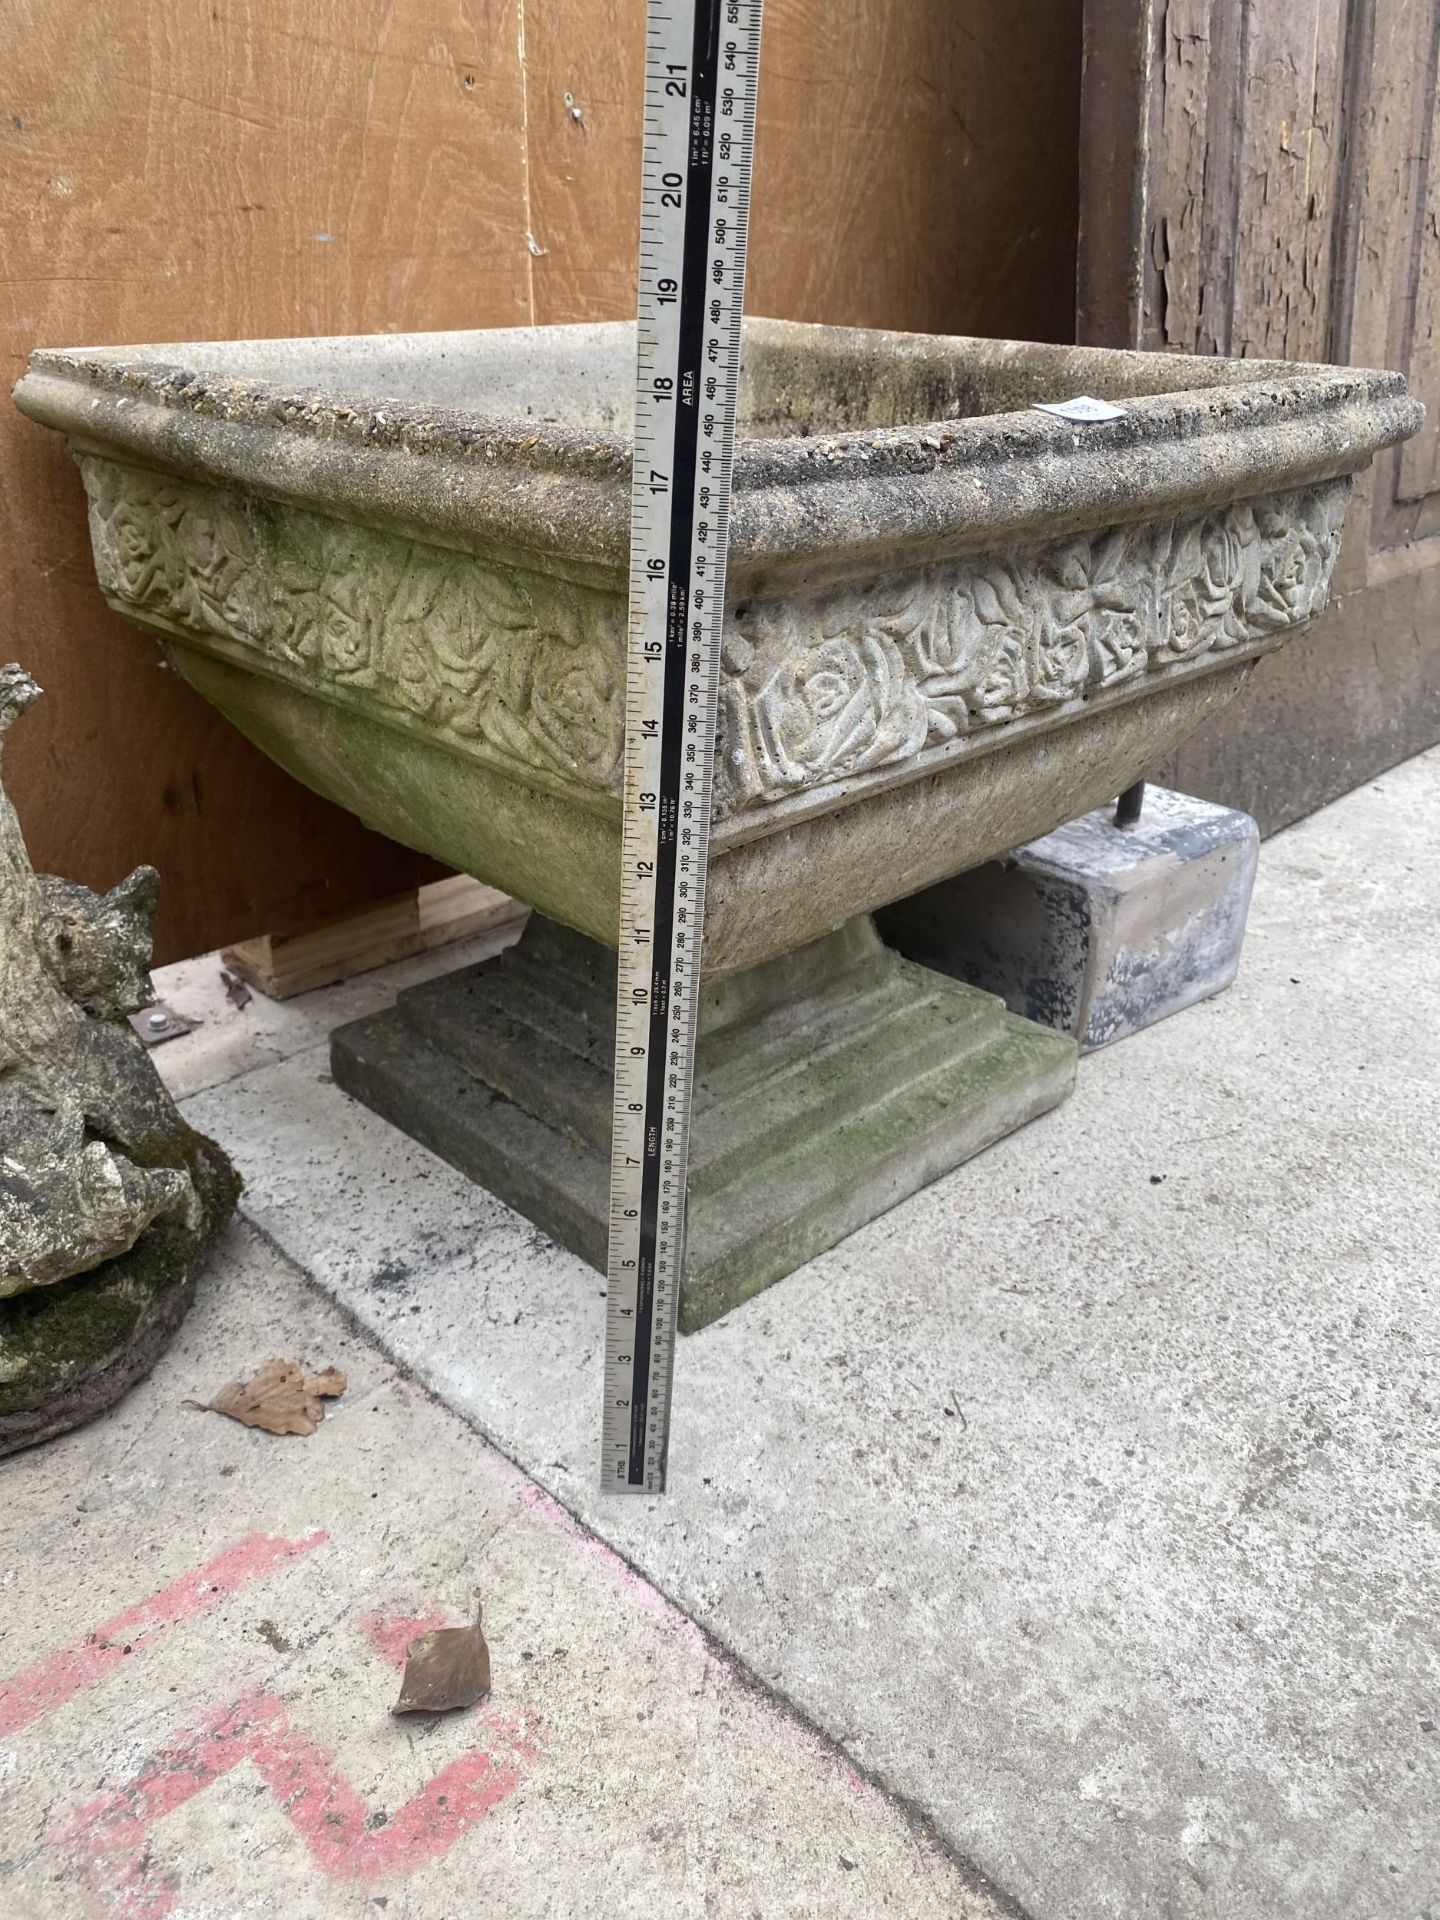 A LARGE SQUARE RECONSTITUTED STONE PLANTER WITH PEDESTAL BASE - Image 2 of 3